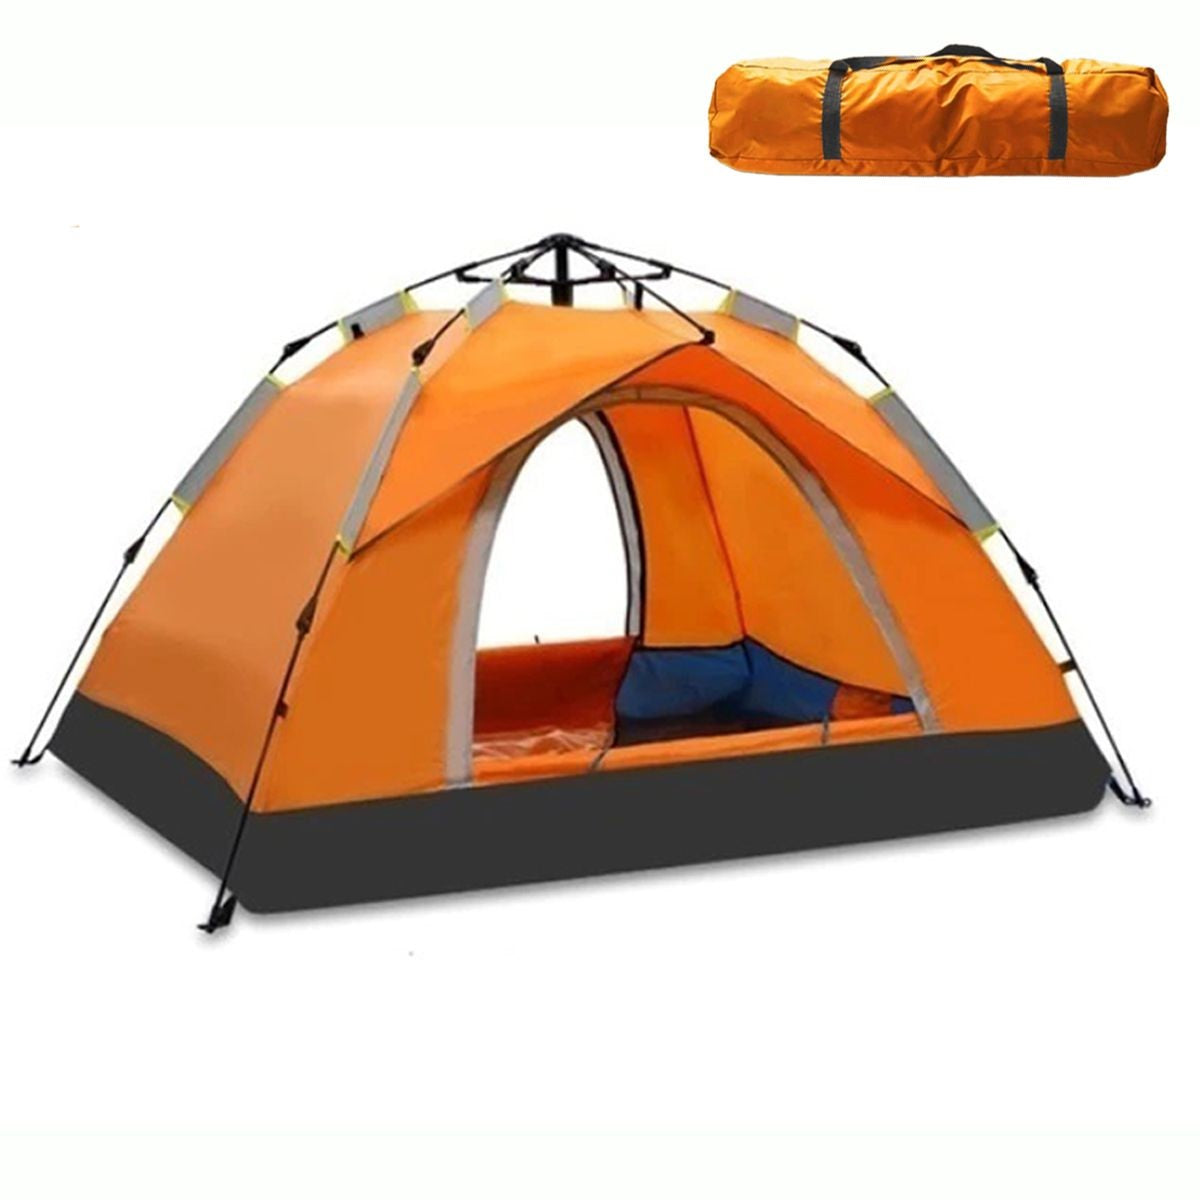 2-Person Waterproof Instant Camping Tent & Carry Bag - 205 x 130cm ORG/BLK